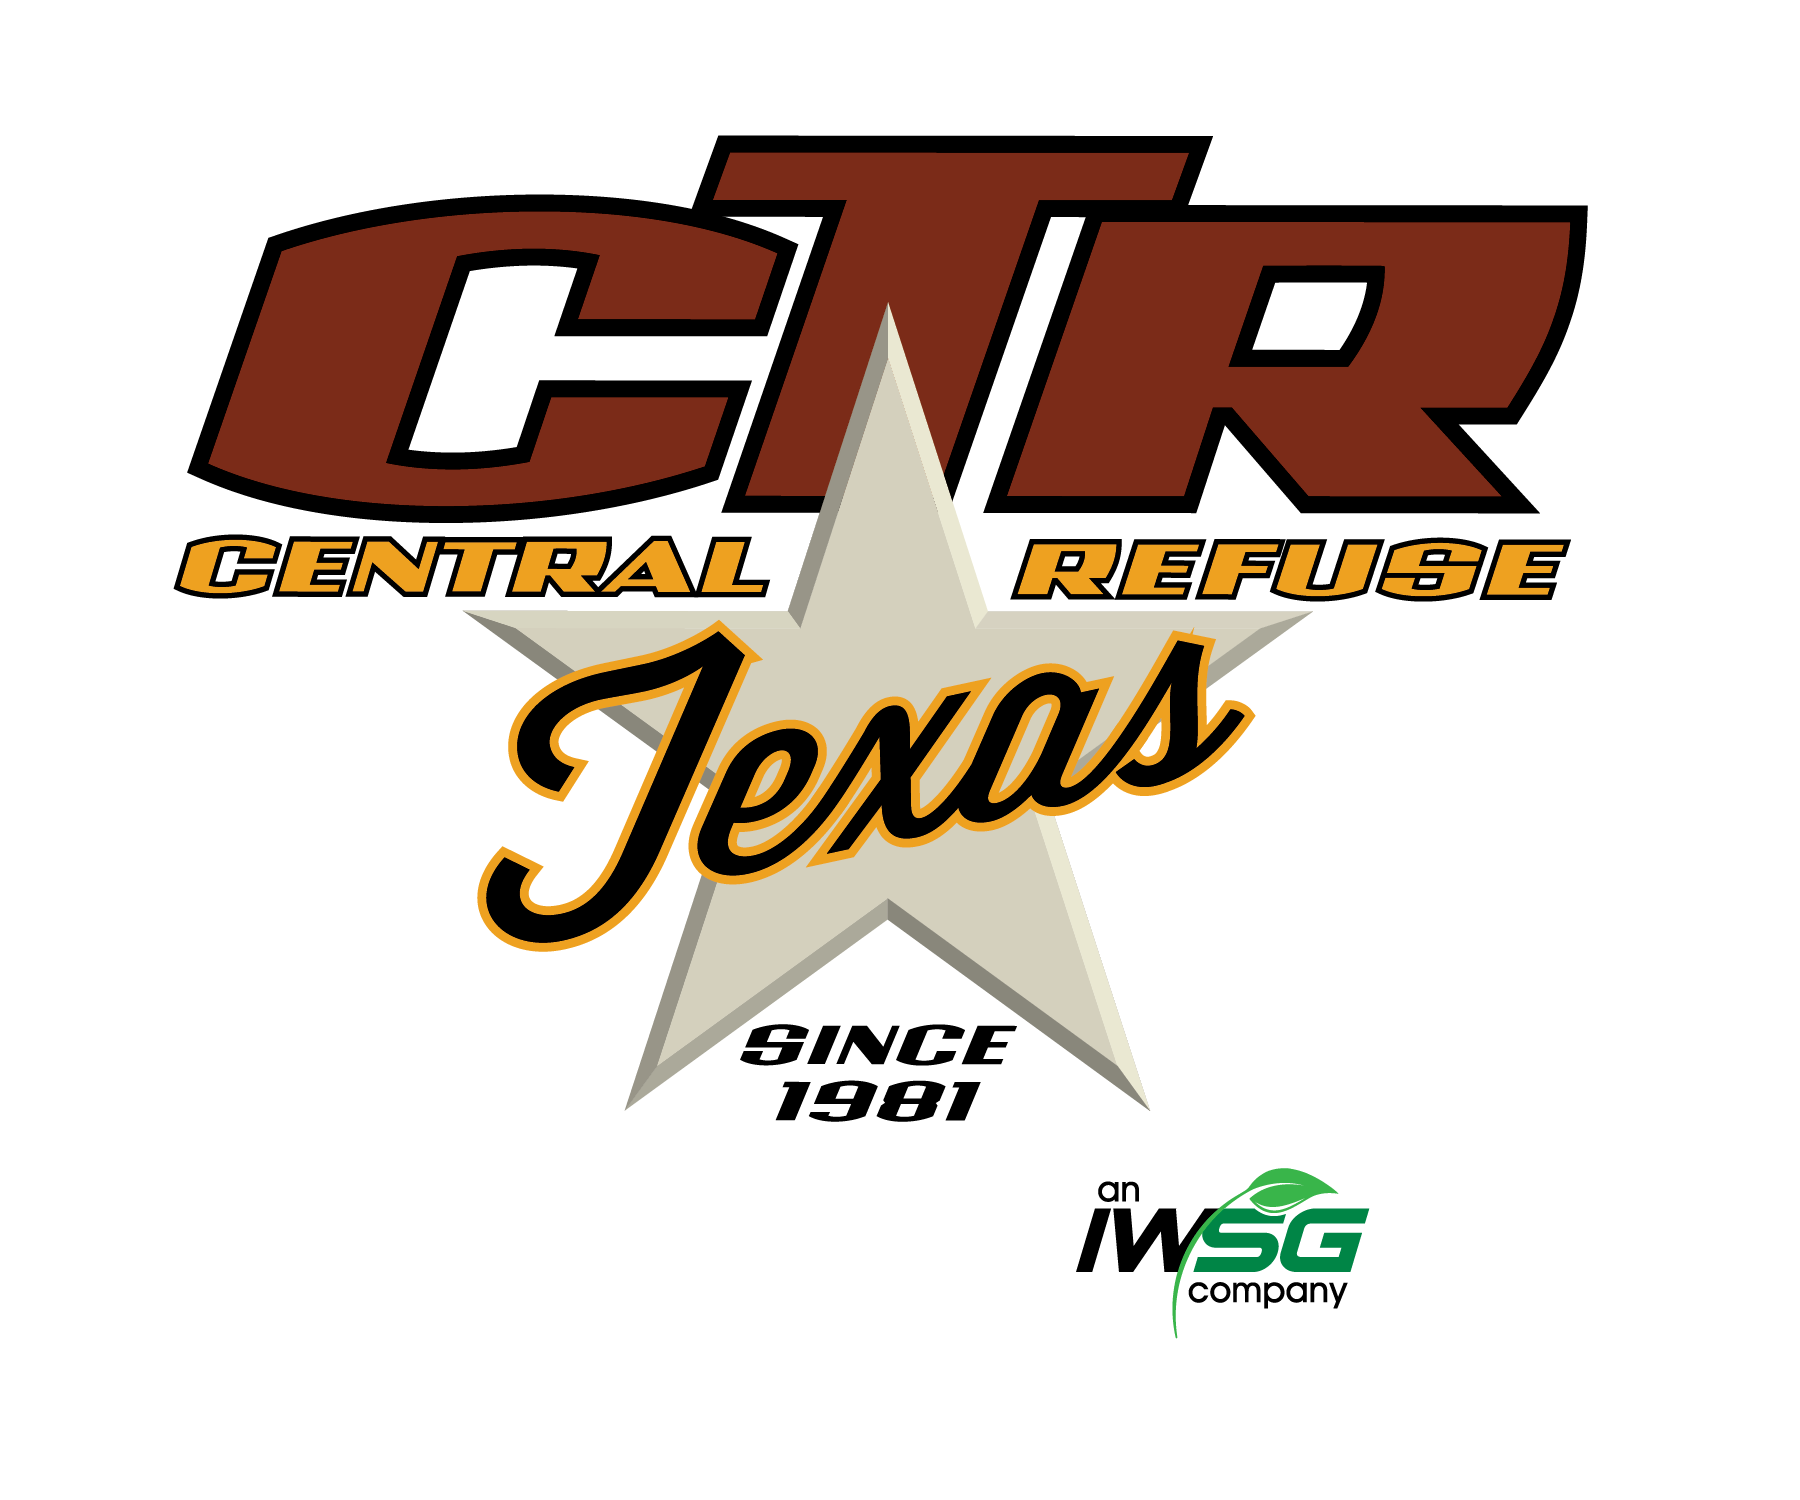 NEW Central Texas Refuse